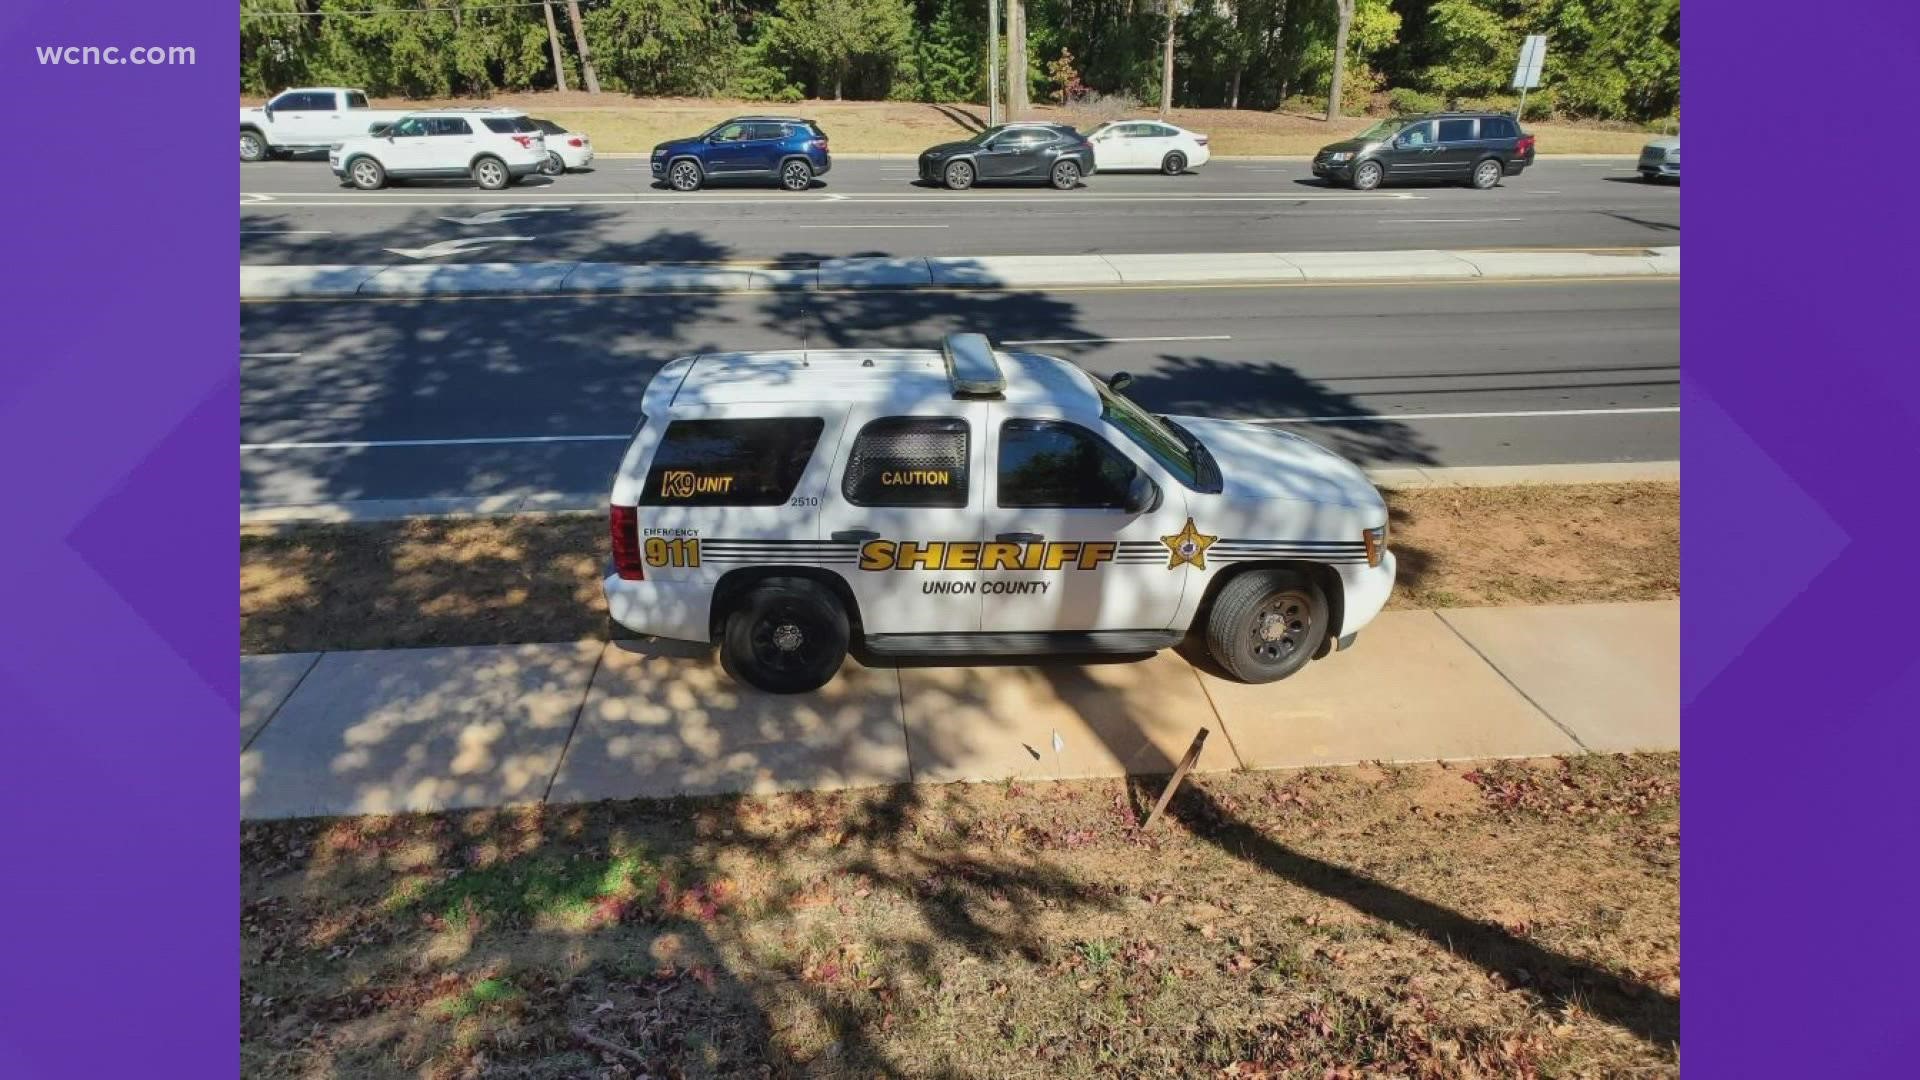 The Union County Sheriff's Office is continuing to search for one suspect after a police chase from their county ended in south Charlotte Wednesday afternoon.